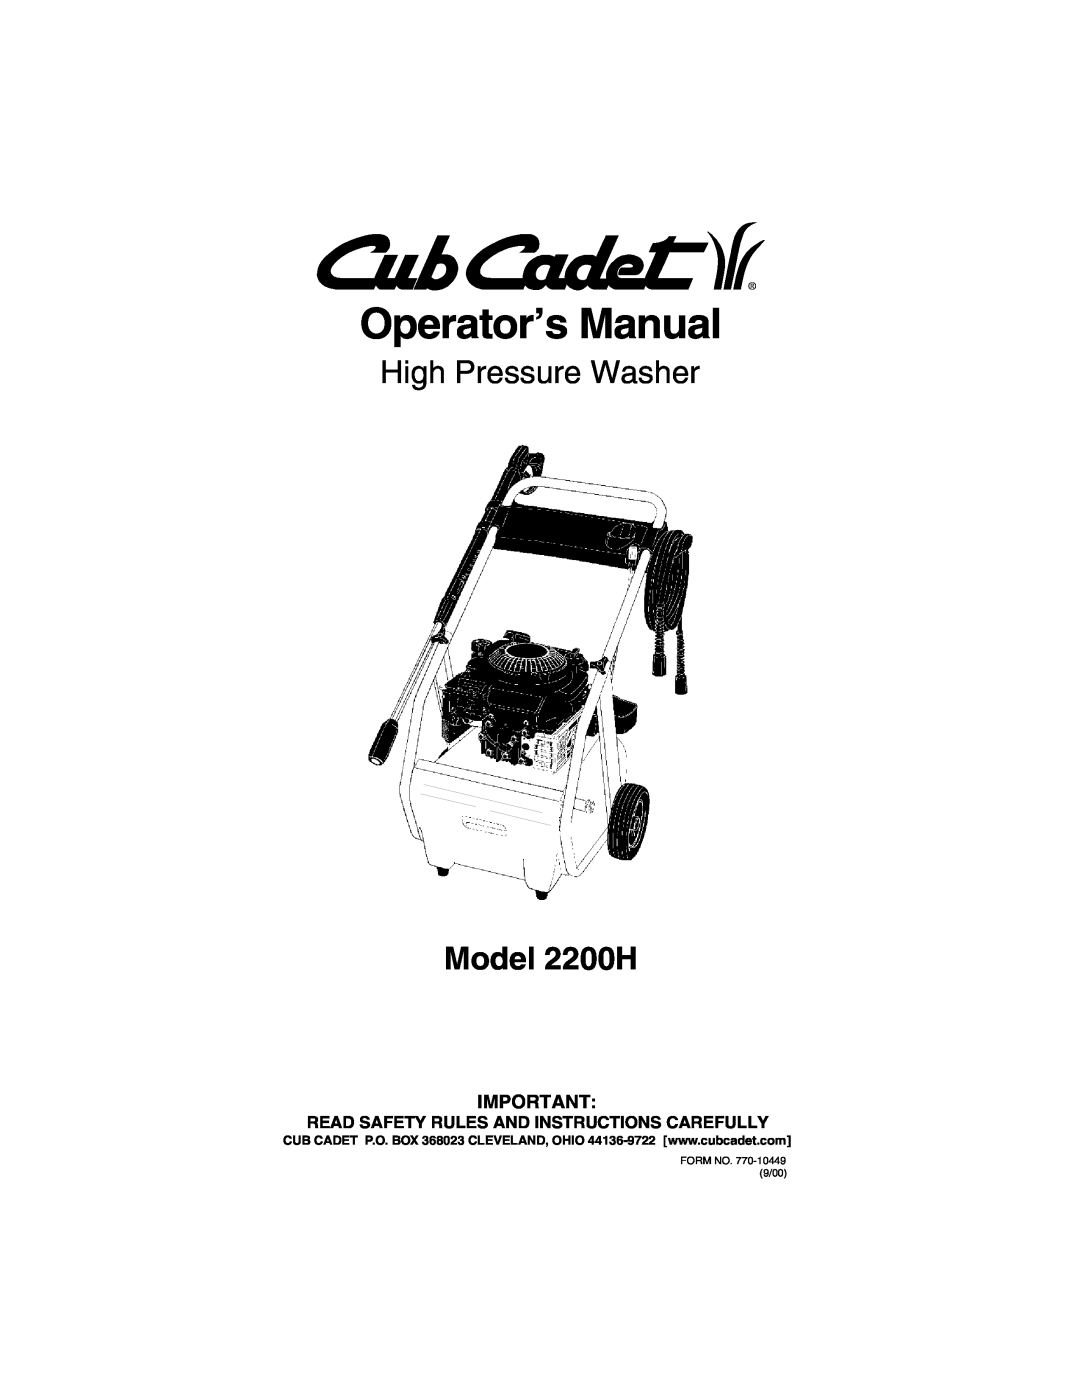 Cub Cadet manual Read Safety Rules And Instructions Carefully, Operator’s Manual, High Pressure Washer, Model 2200H 